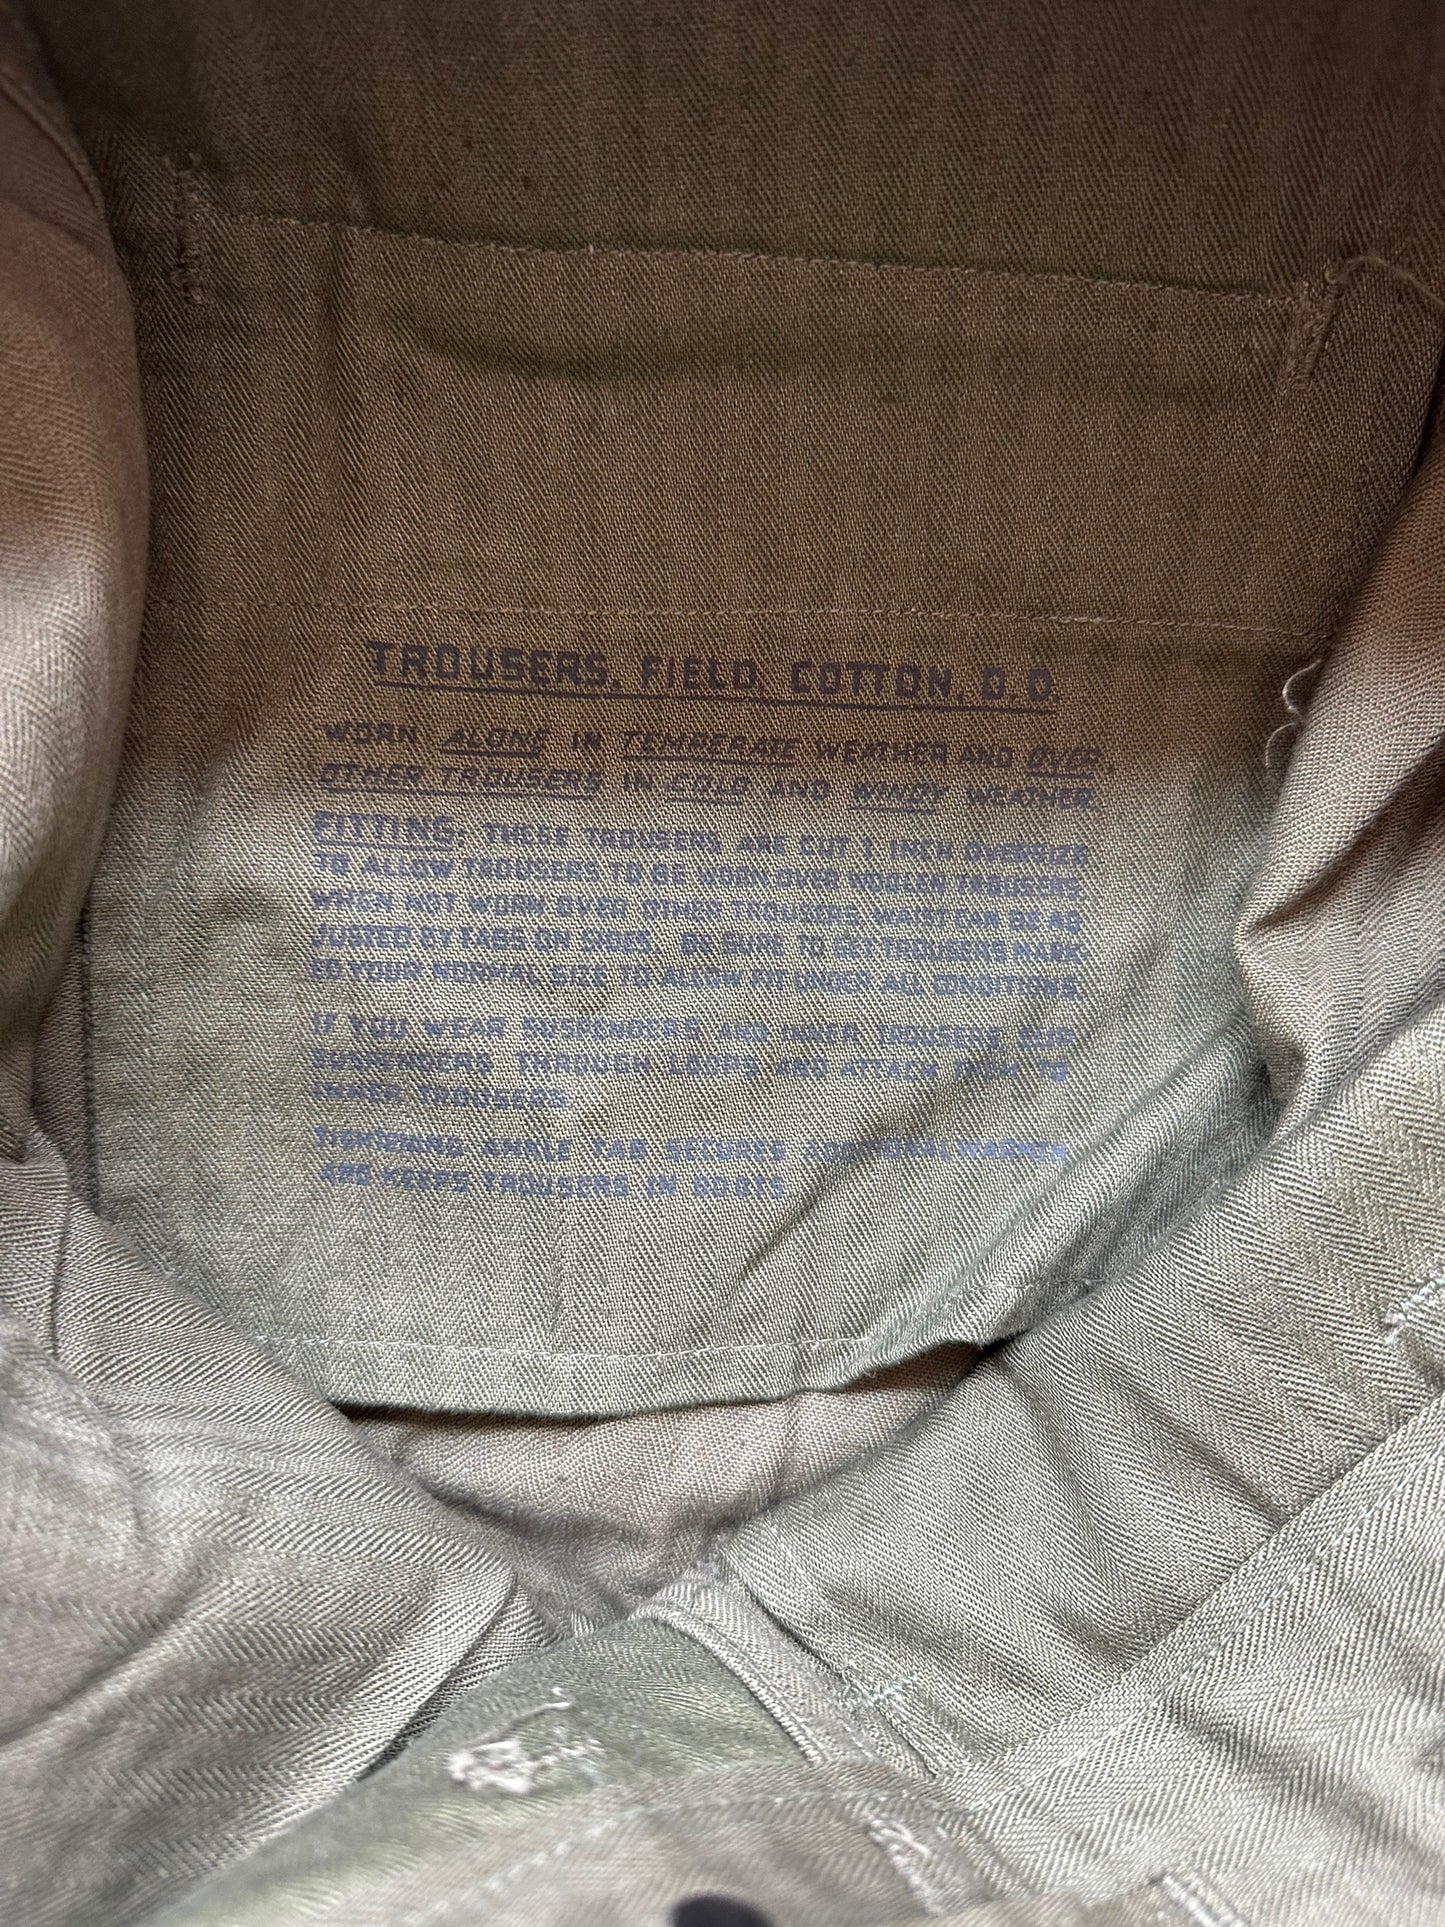 Label on Vintage WWII M-43 HBT Field Cotton Trousers Olive Drab W34 | Barn Owl Vintage Seattle | Vintage Military Trousers Seattle